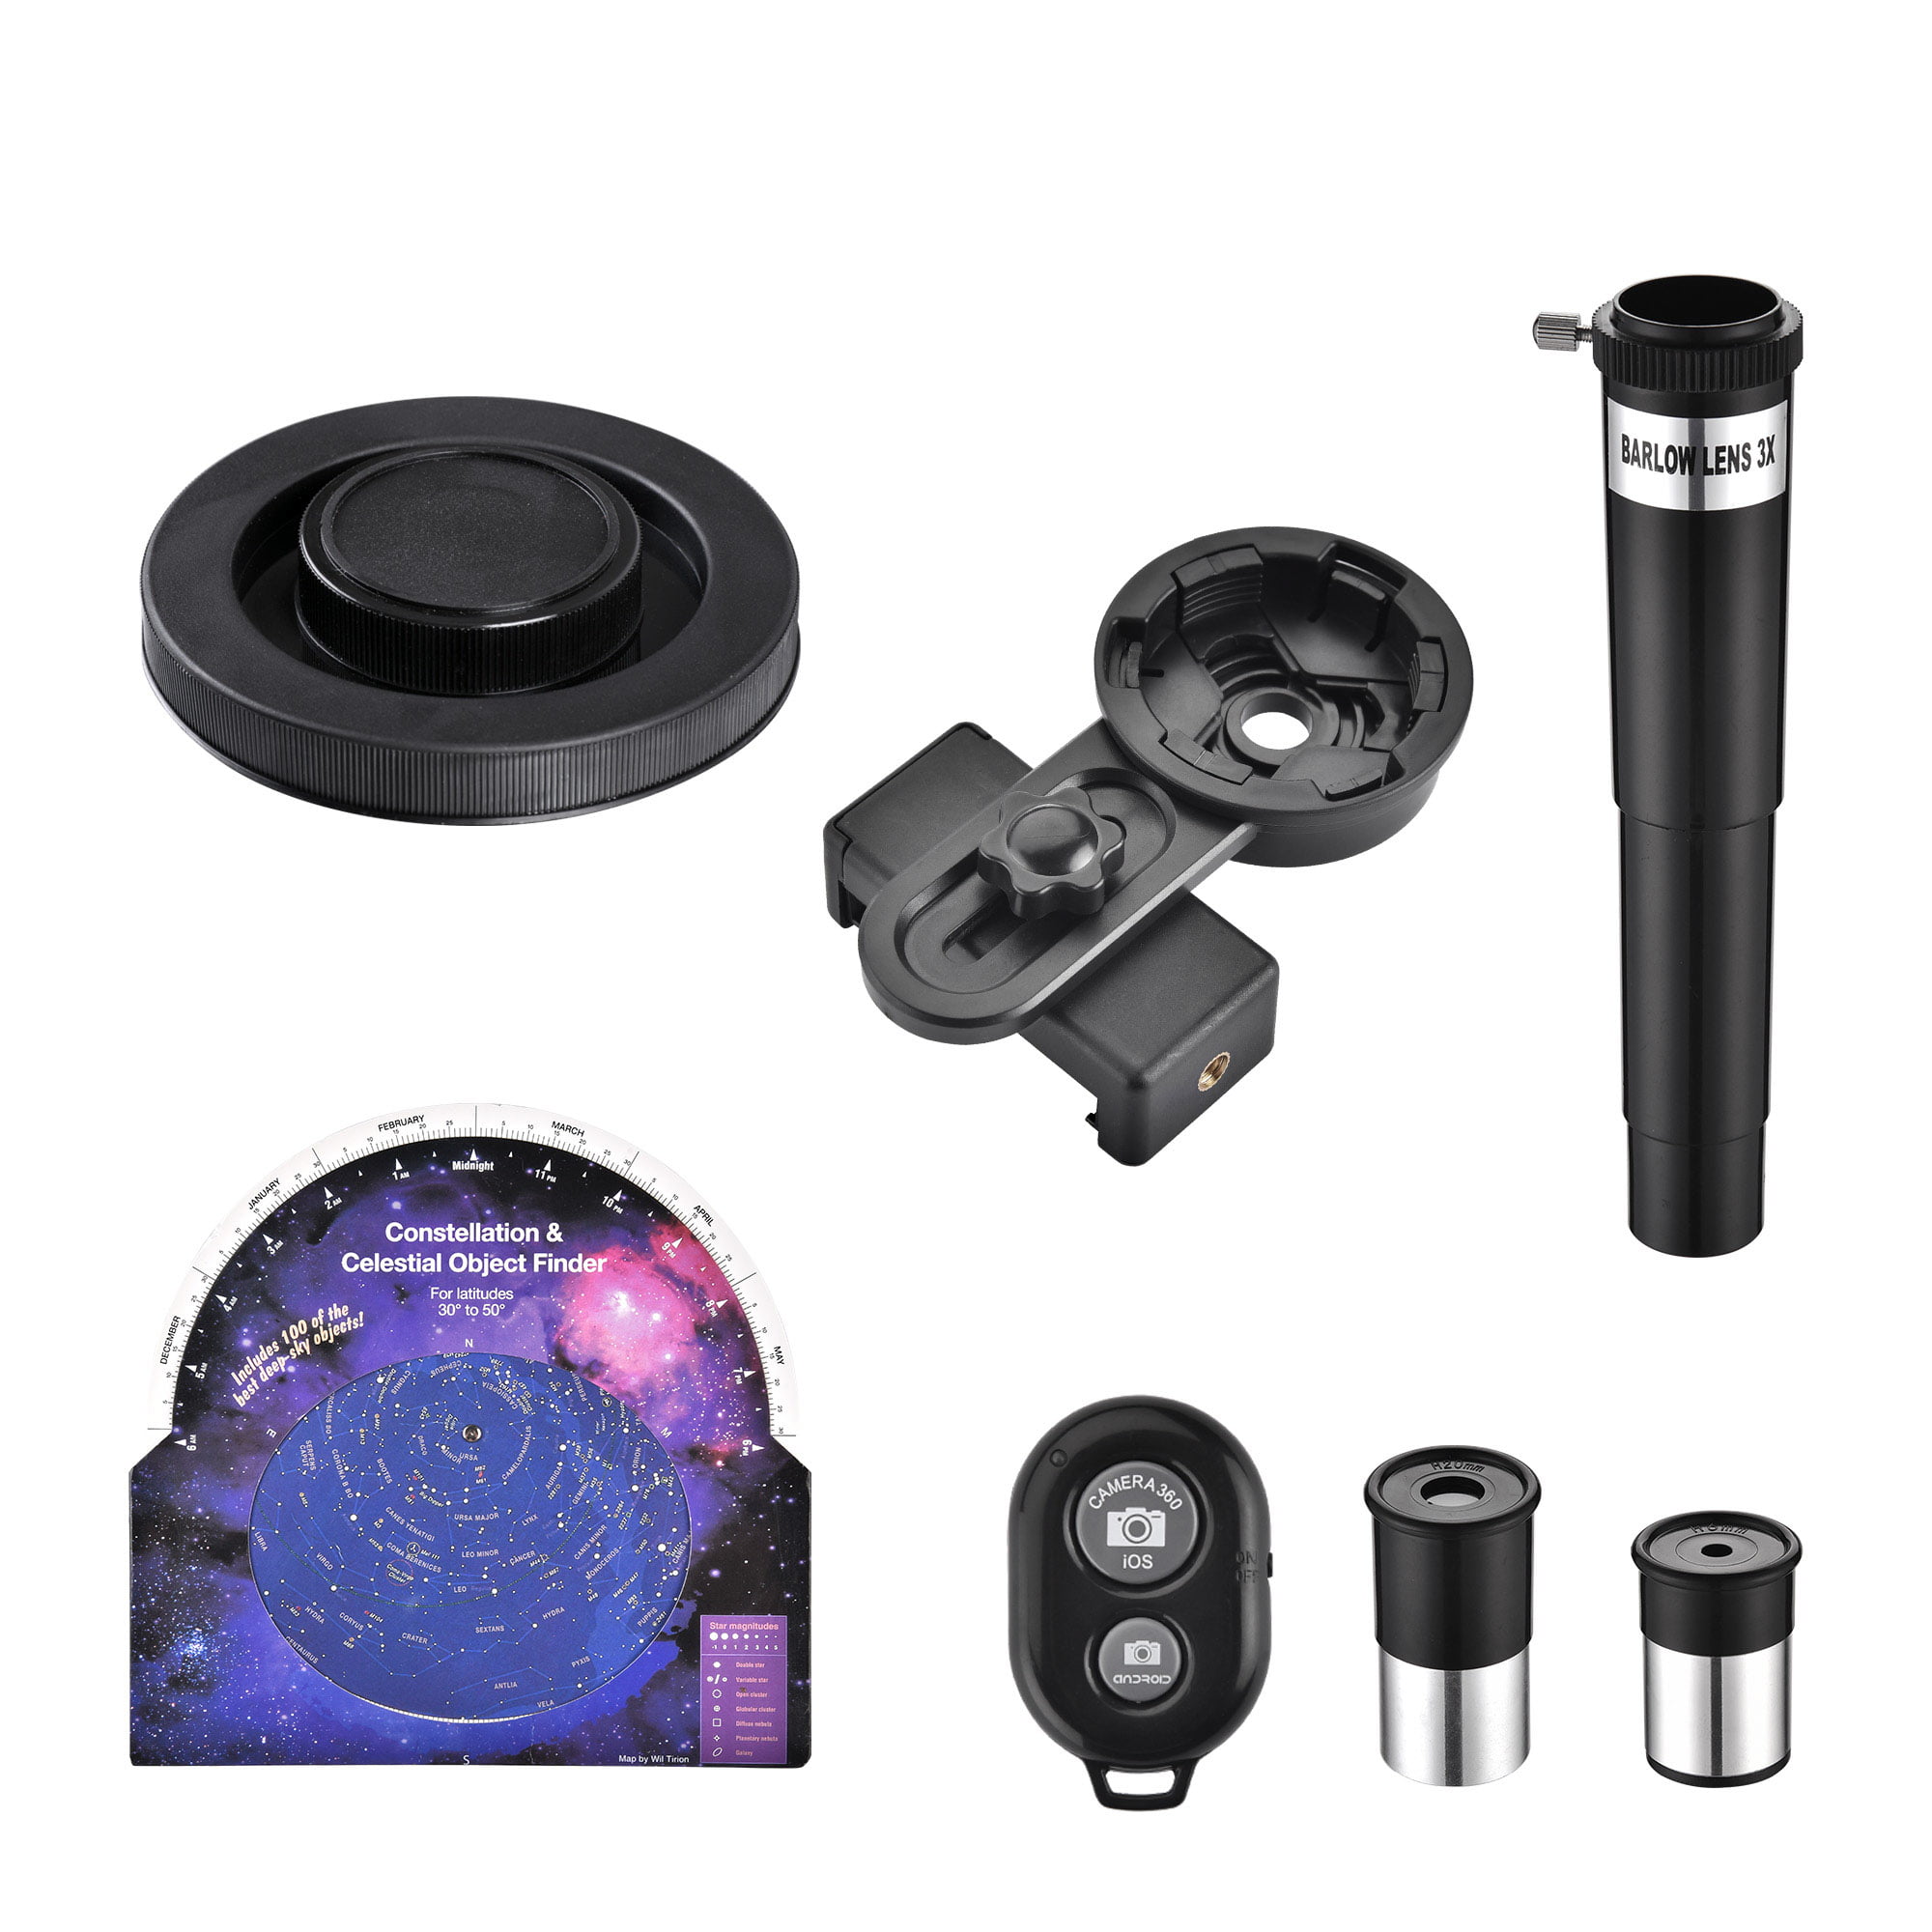 Different Magnification eyepieces can Make You Free with observed at Different Distances and Sizes US Delivery 50mm Astronomical Refractor Telescope Table Top ，2 eyepieces 